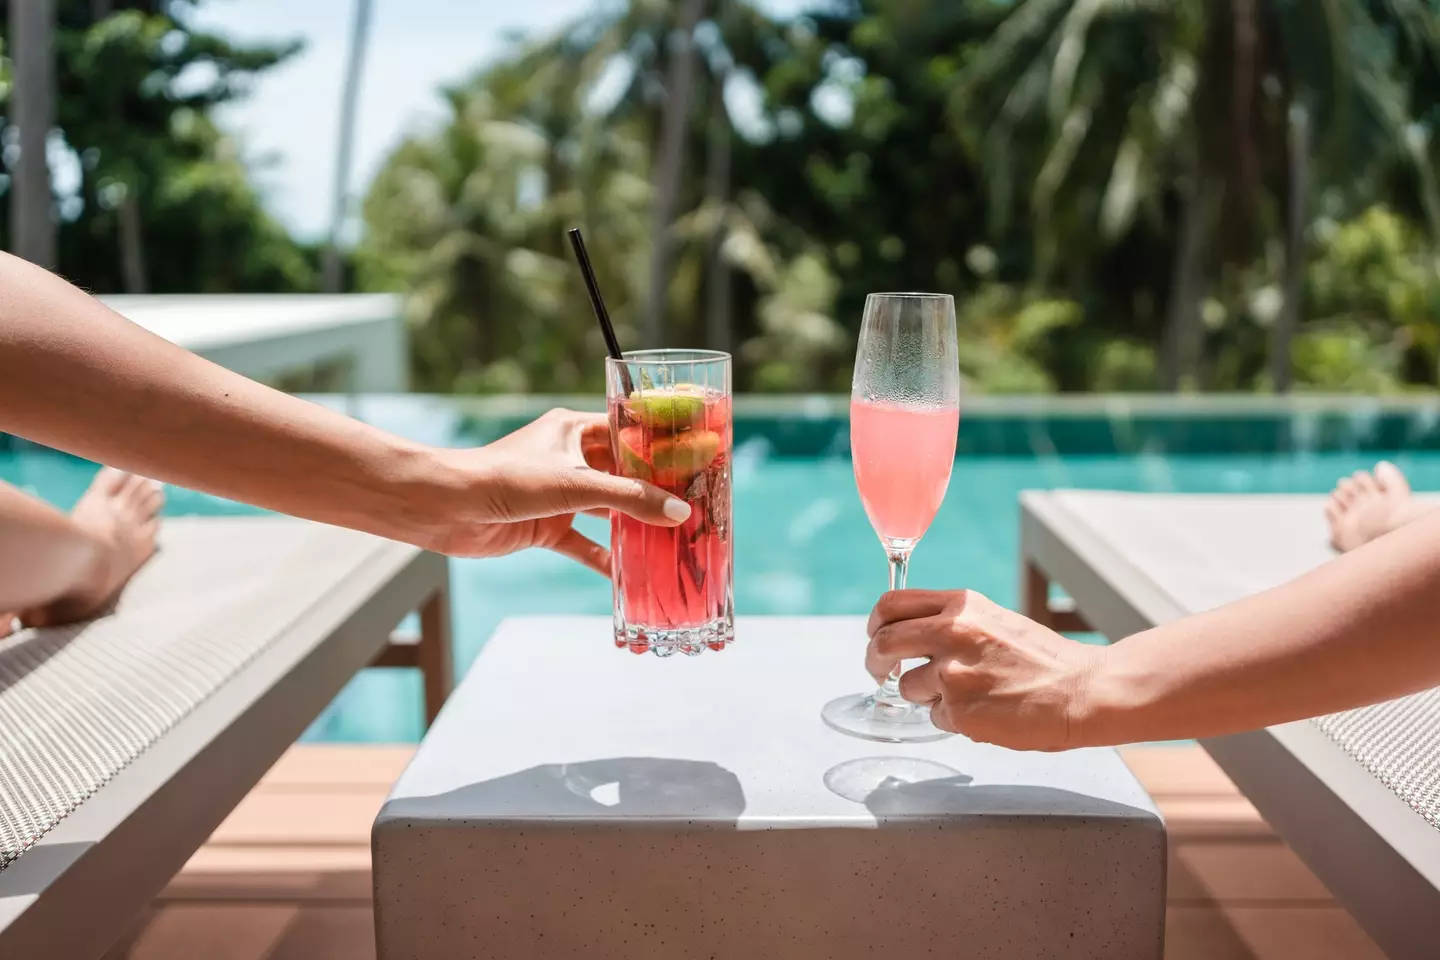 Gone are the days of limitless bevving in your all-inclusive Spanish getaway.